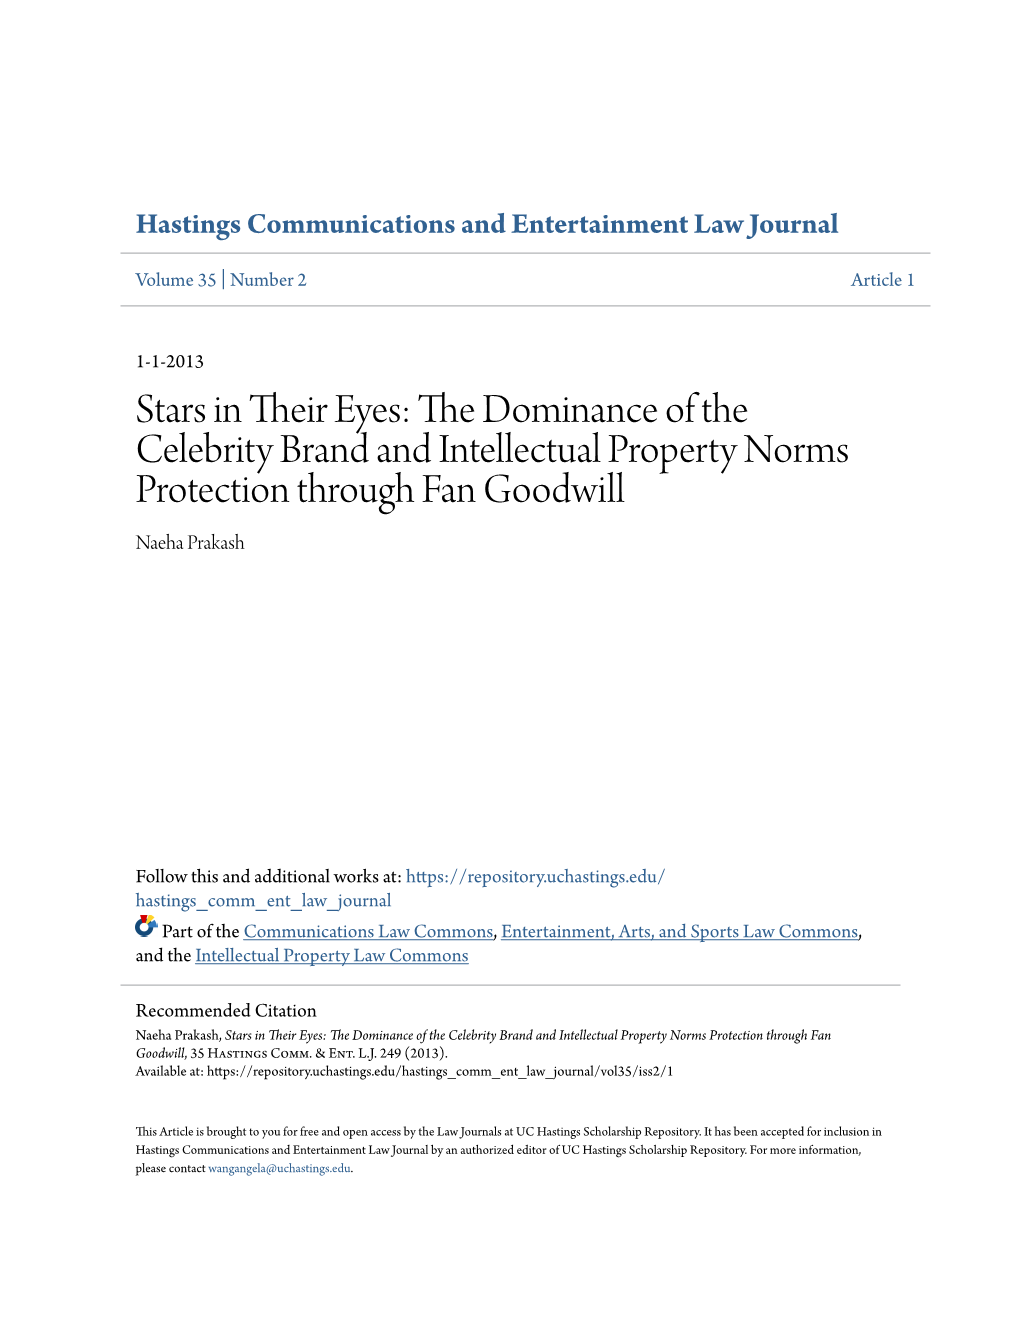 The Dominance of the Celebrity Brand and Intellectual Property Norms Protection Through Fan Goodwill, 35 Hastings Comm